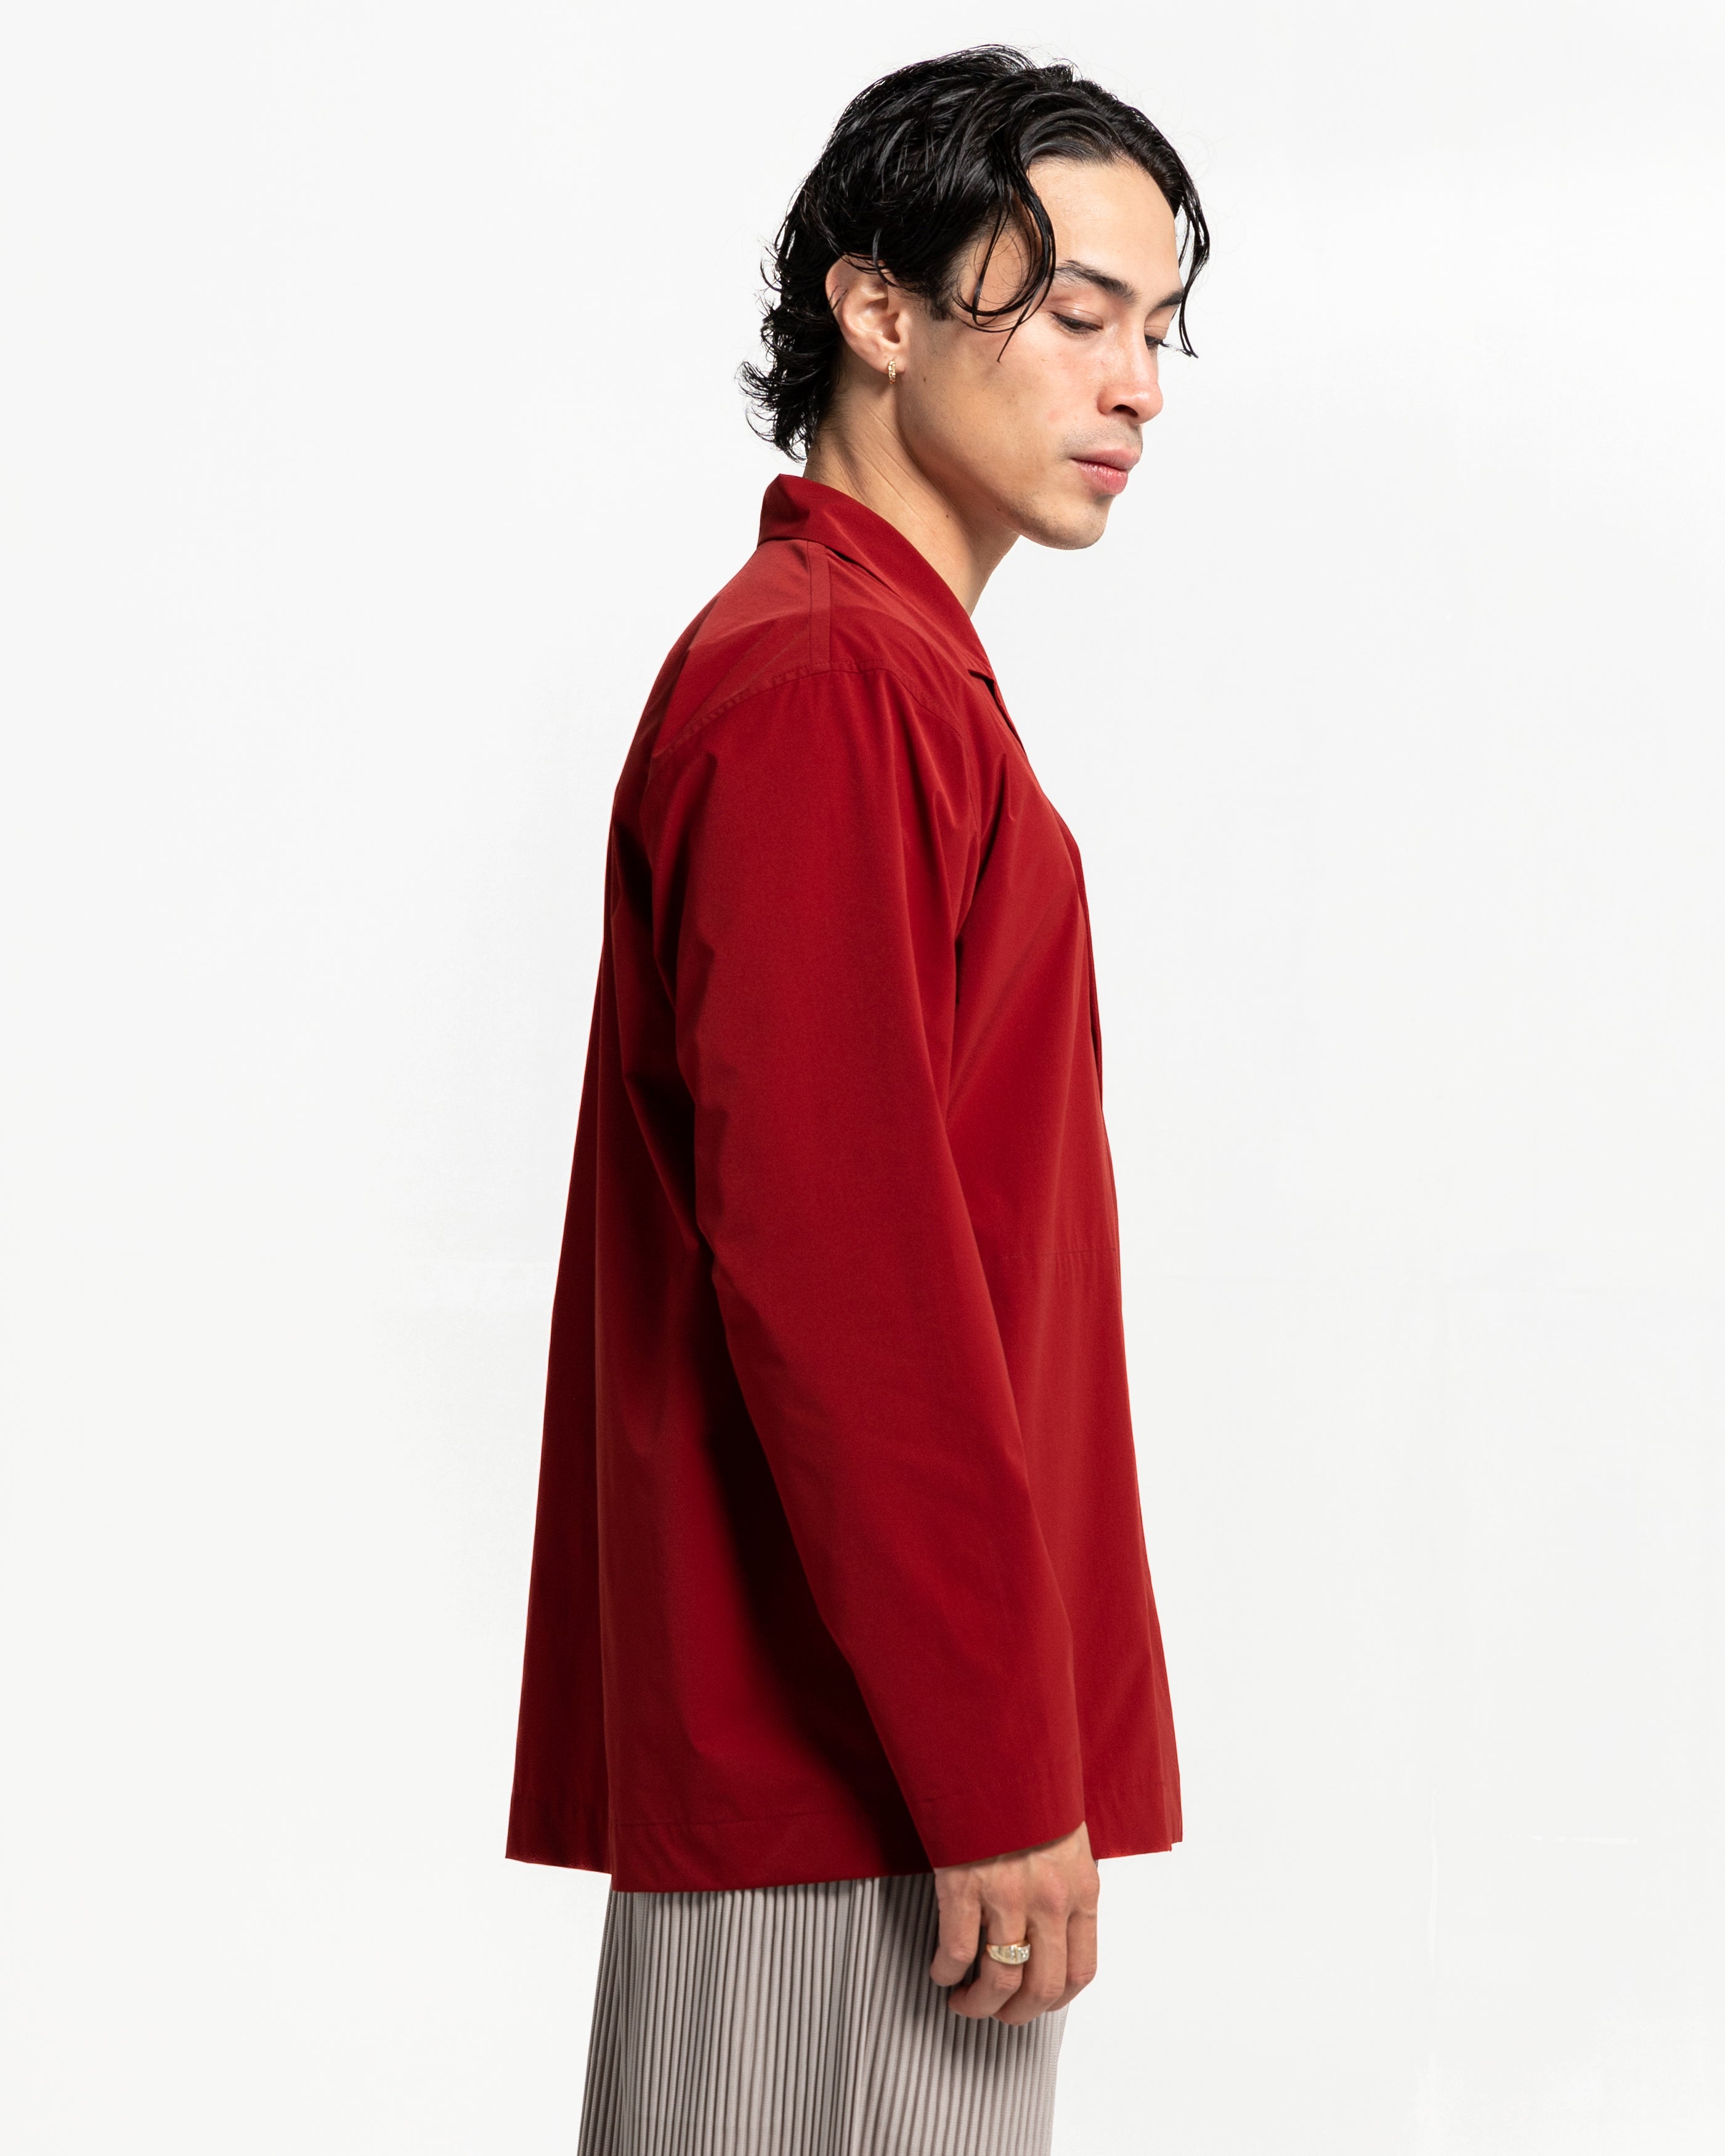 Stretch Shirt in Red